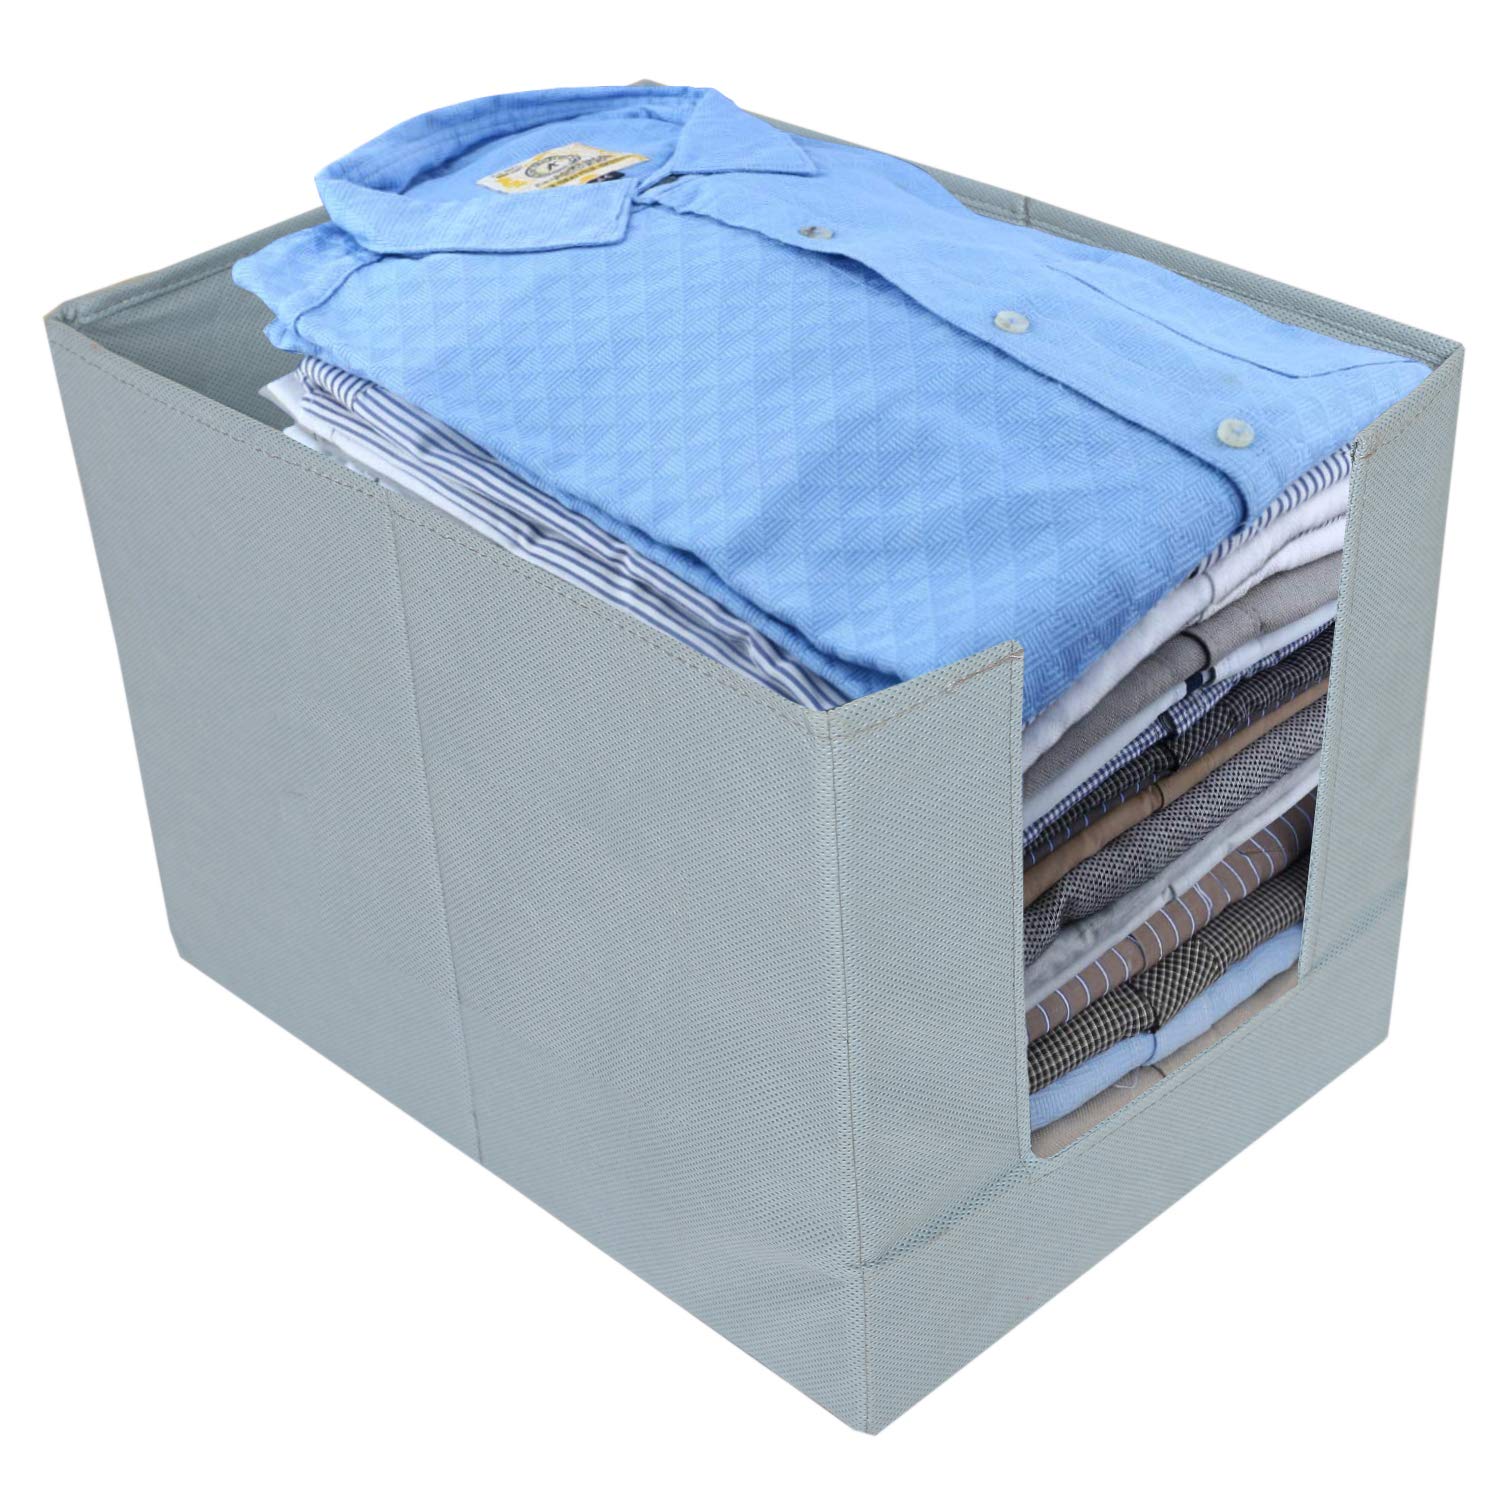 Kuber Industries Non-Woven Shirt Stacker/Clothes Organizer|Solid Color & Foldable Non Woven Material|Closet & Wardrobe Organizer|Size 40 x 20 x 25 Cm, Pack of 4 (Grey)